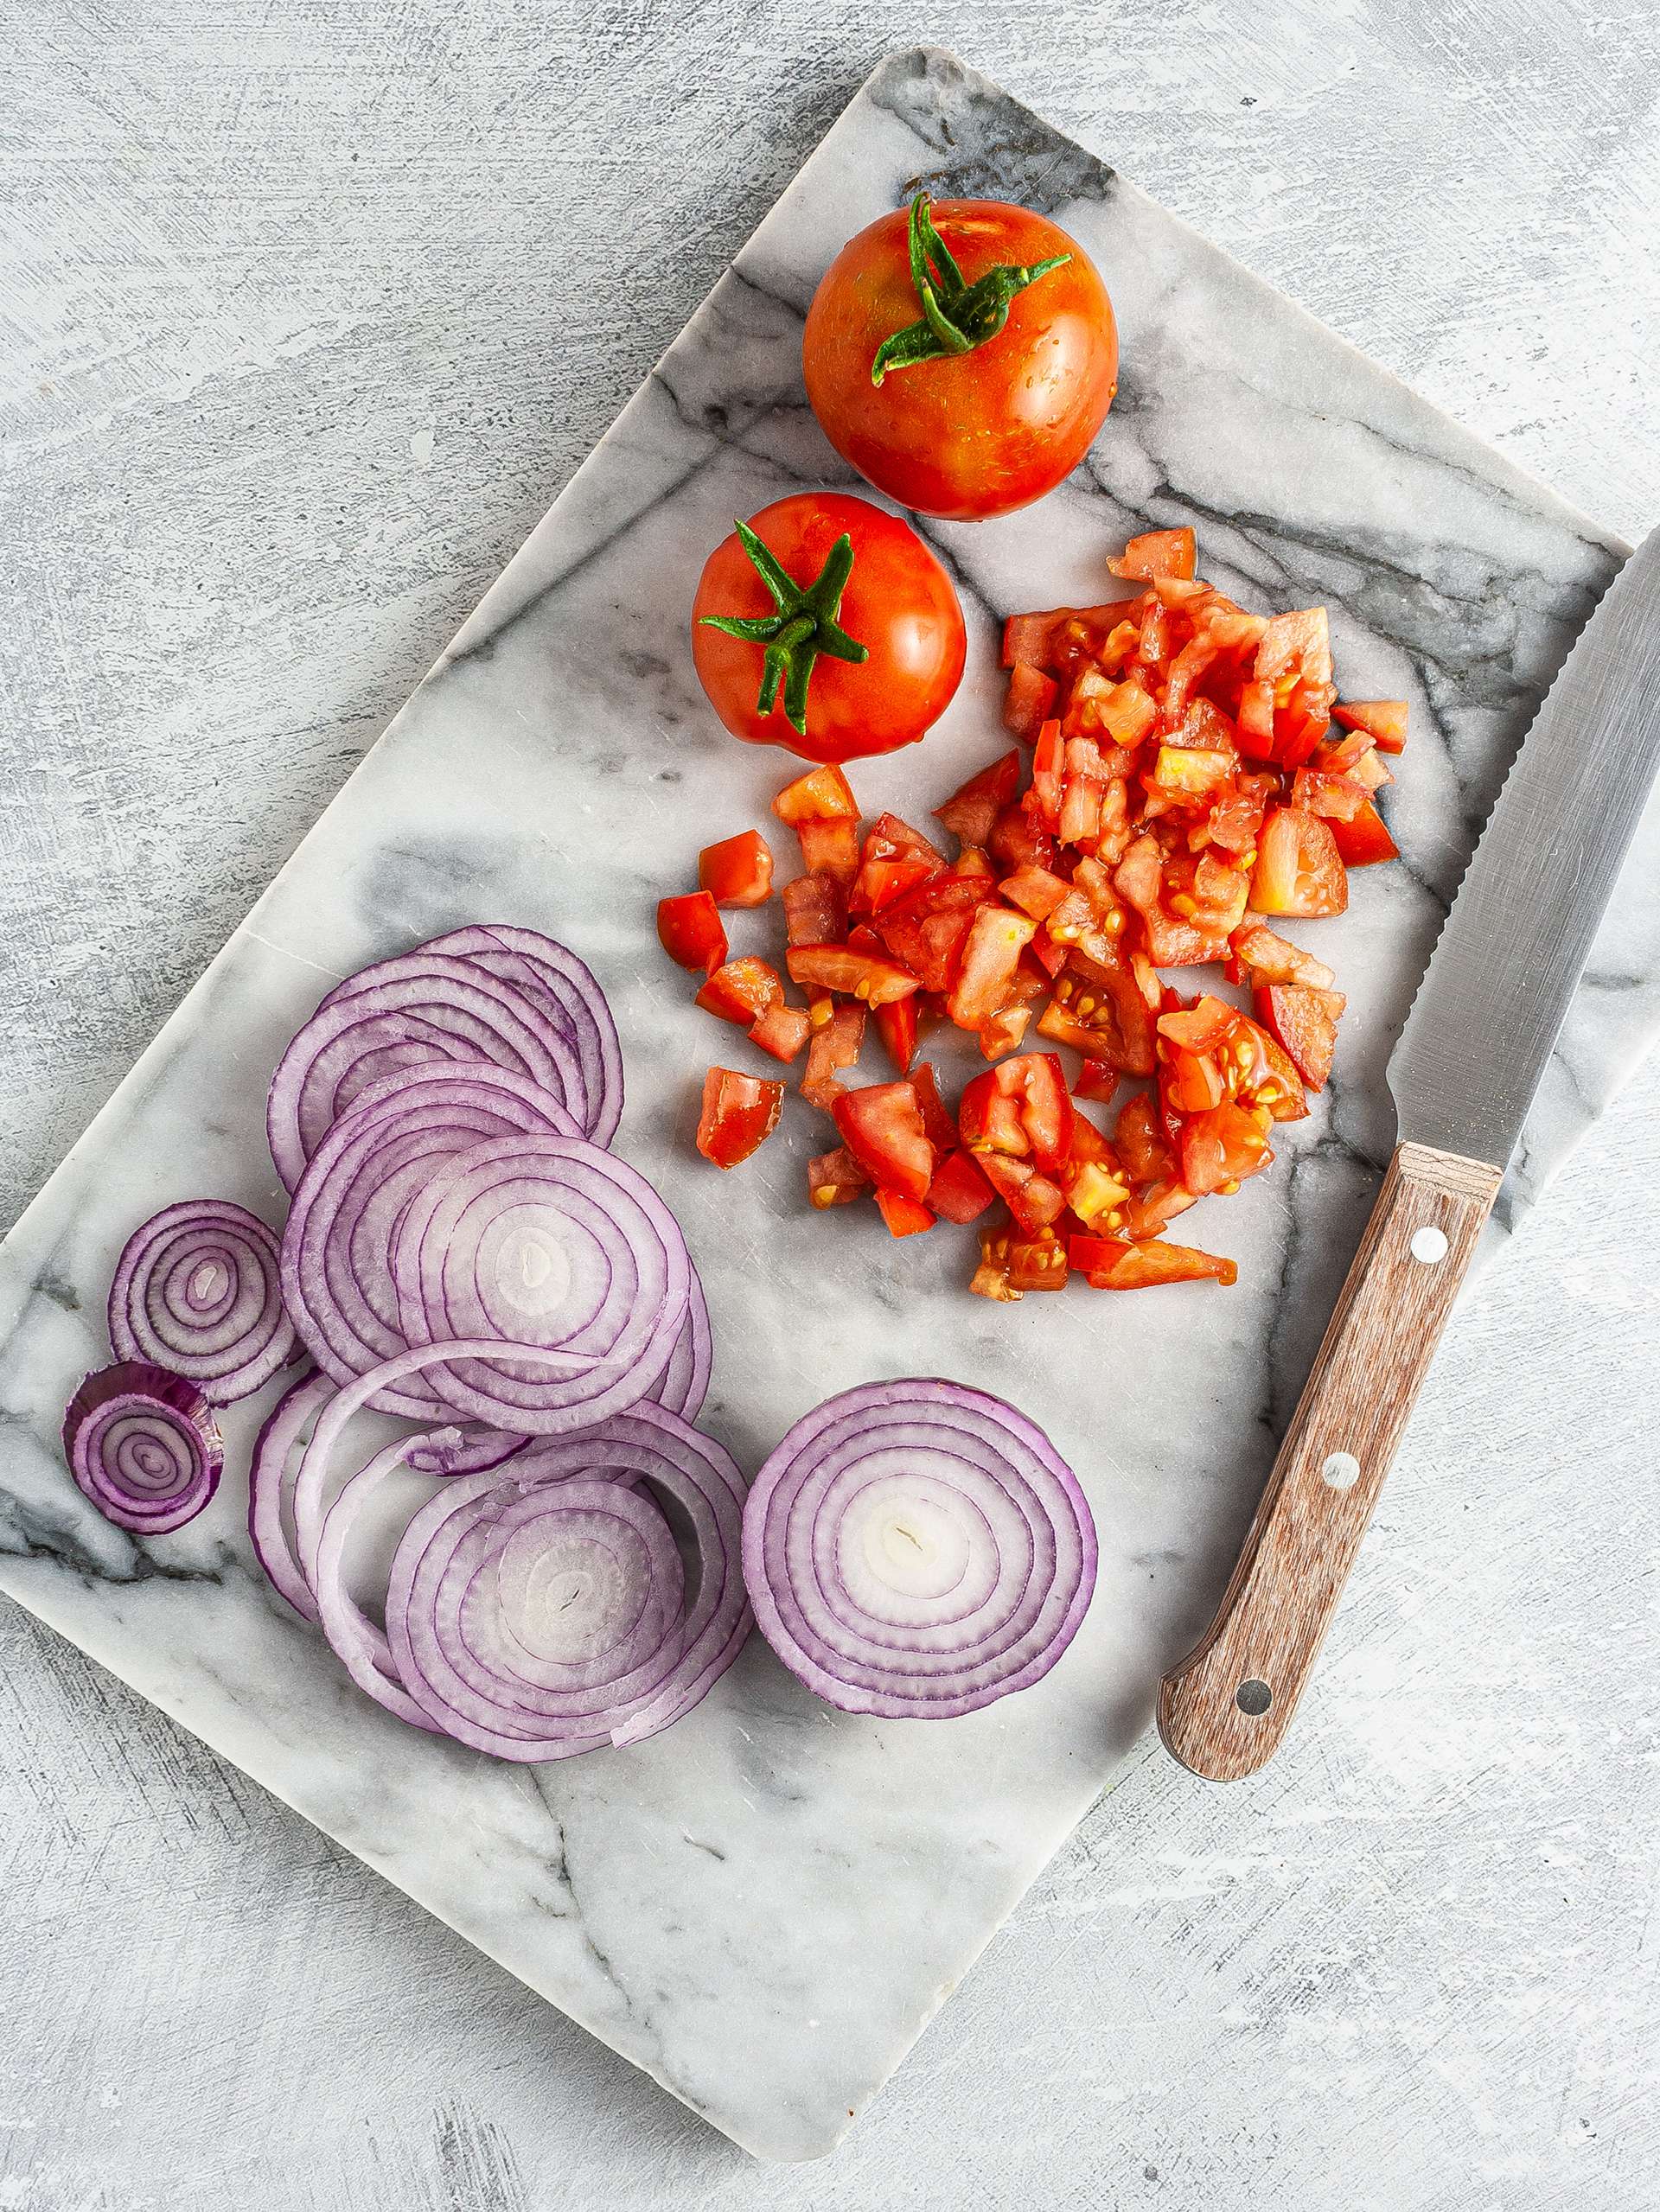 Chopped tomatoes and onions